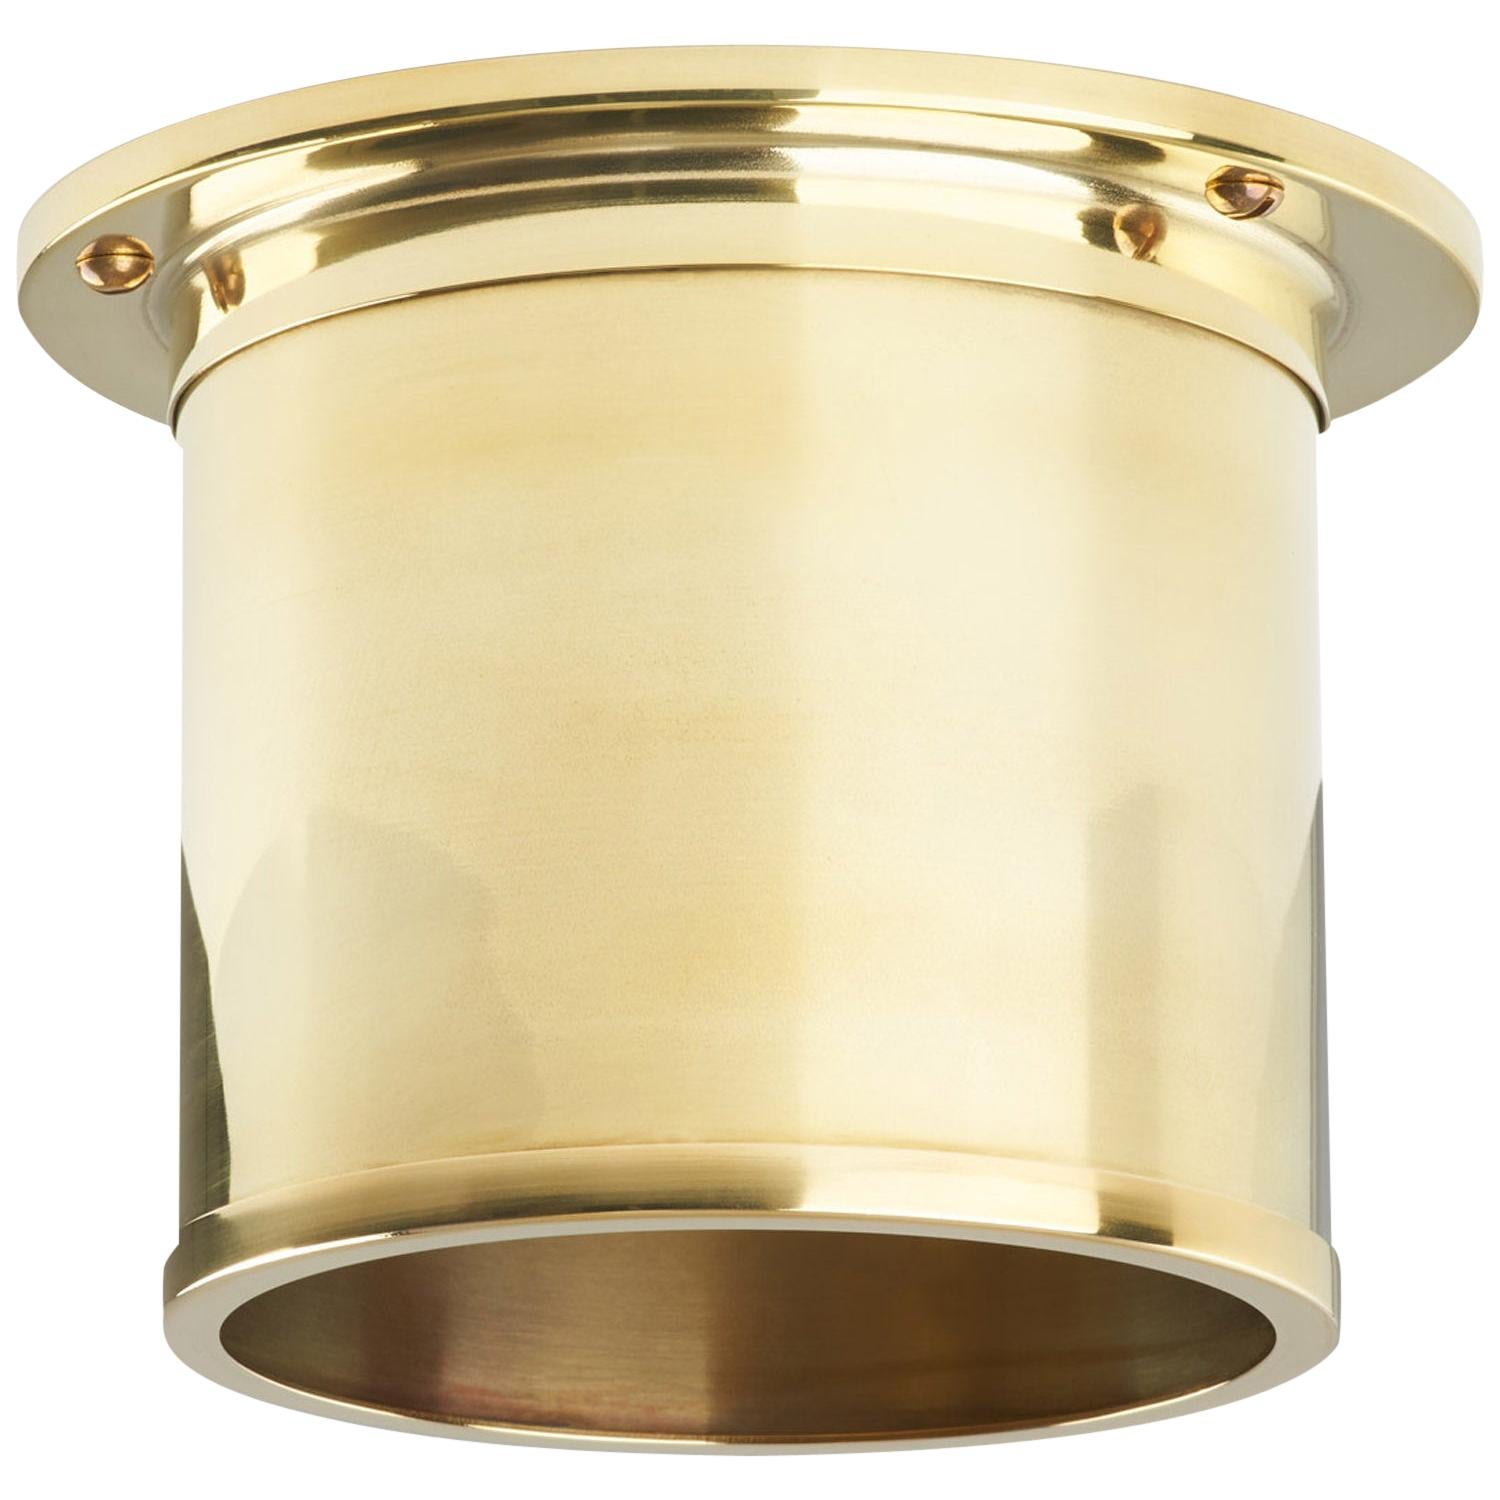 Compton Spot Diffuser, Polished Brass Recessed Spot Light Shade - Shade Only No